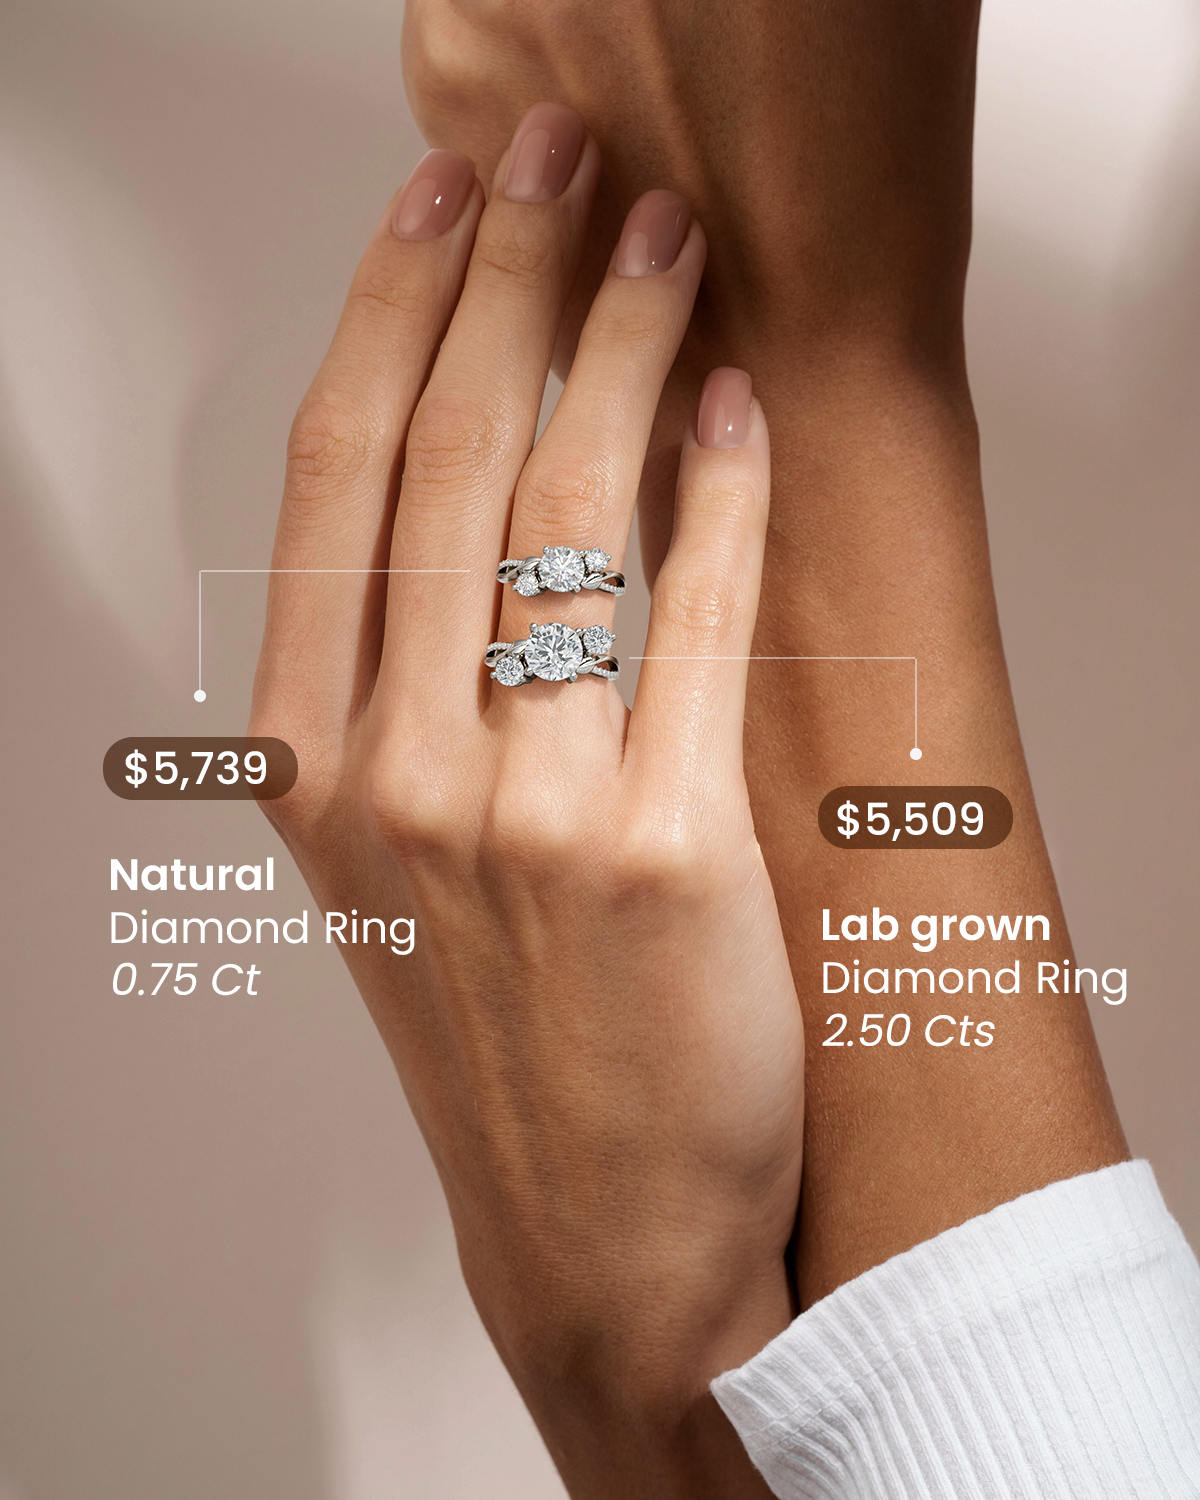 Millennials Marrying Later Could Mean Buying Bigger Diamonds